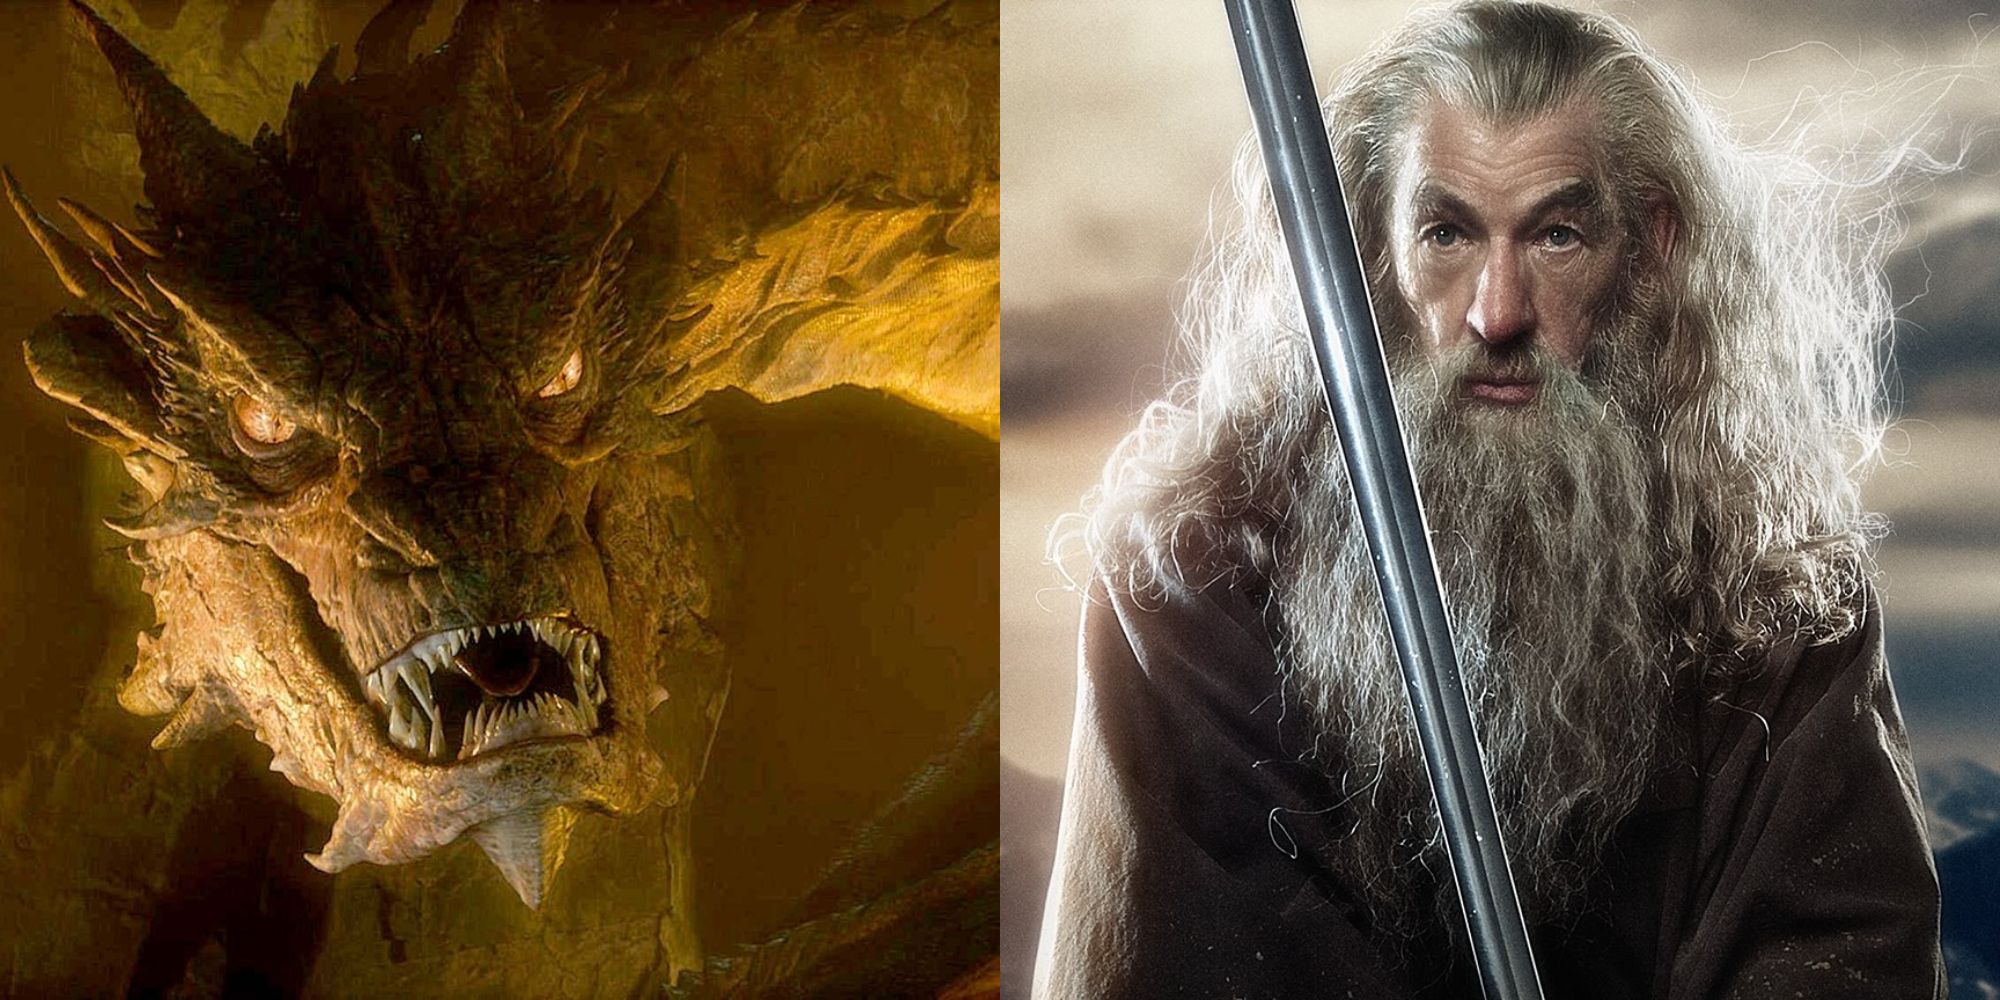 Split image showing Smaug and Gandalf in The Hobbit trilogy.